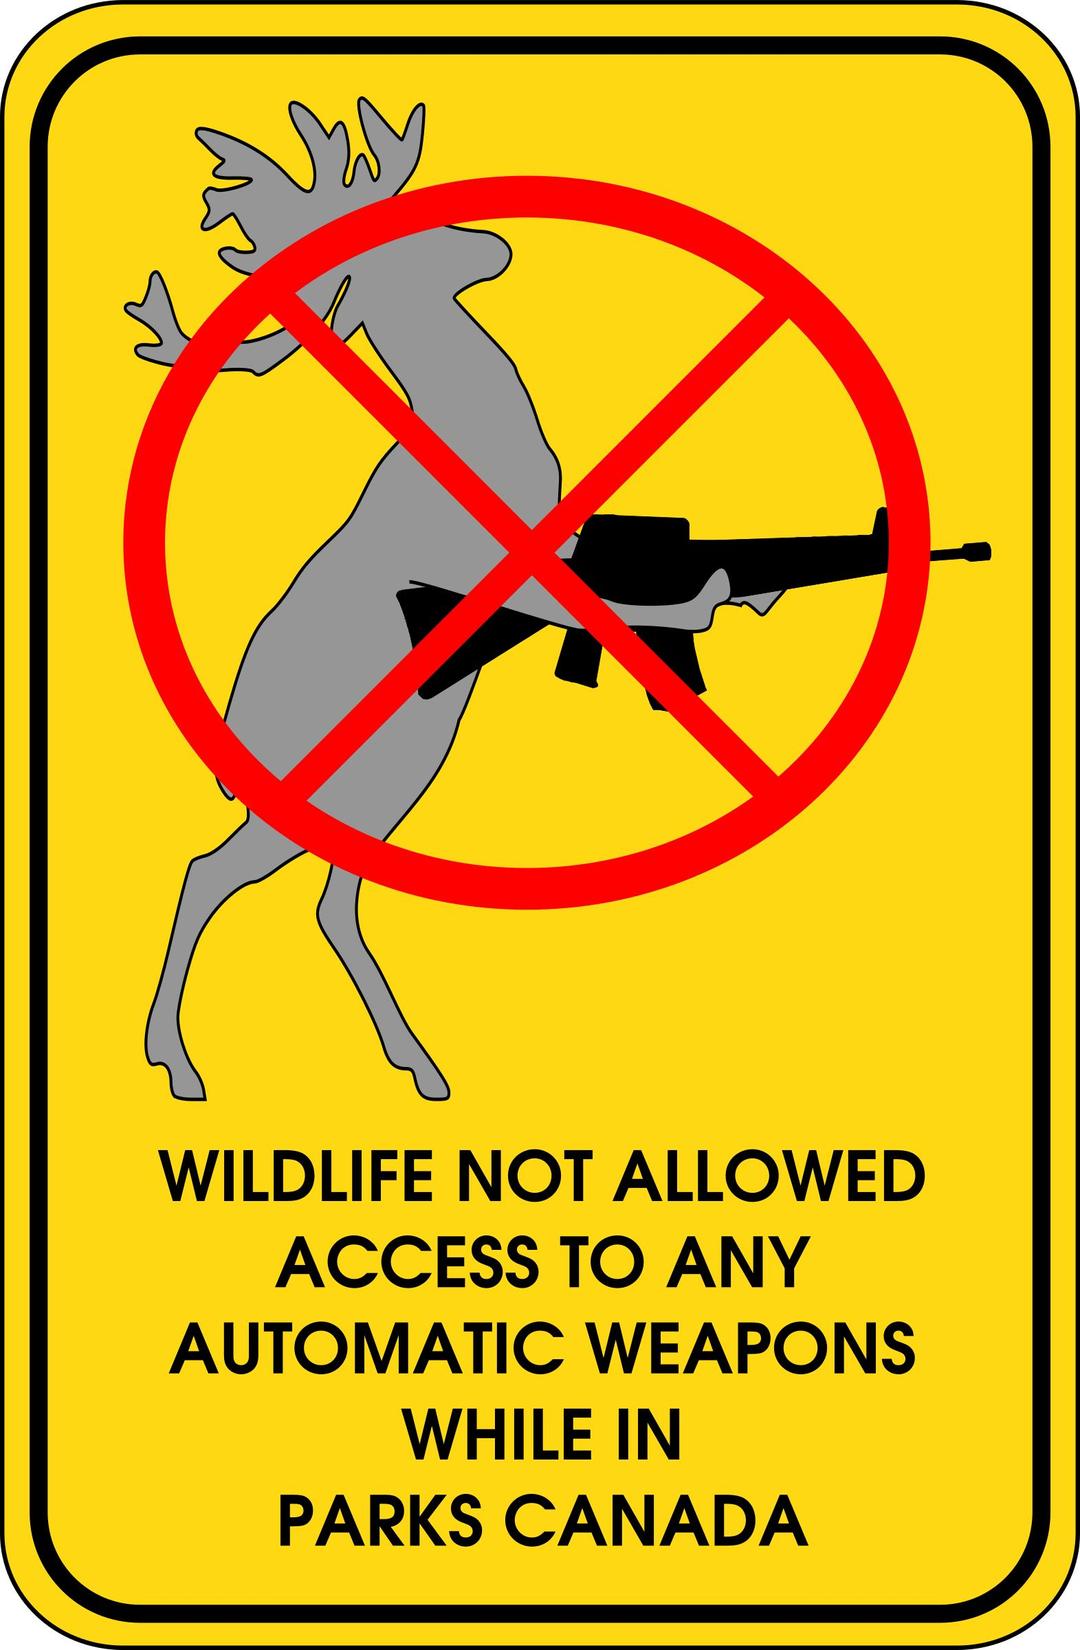 Wildlife Not Allowed To Access Automatic Weapons While In Parks Canada png transparent